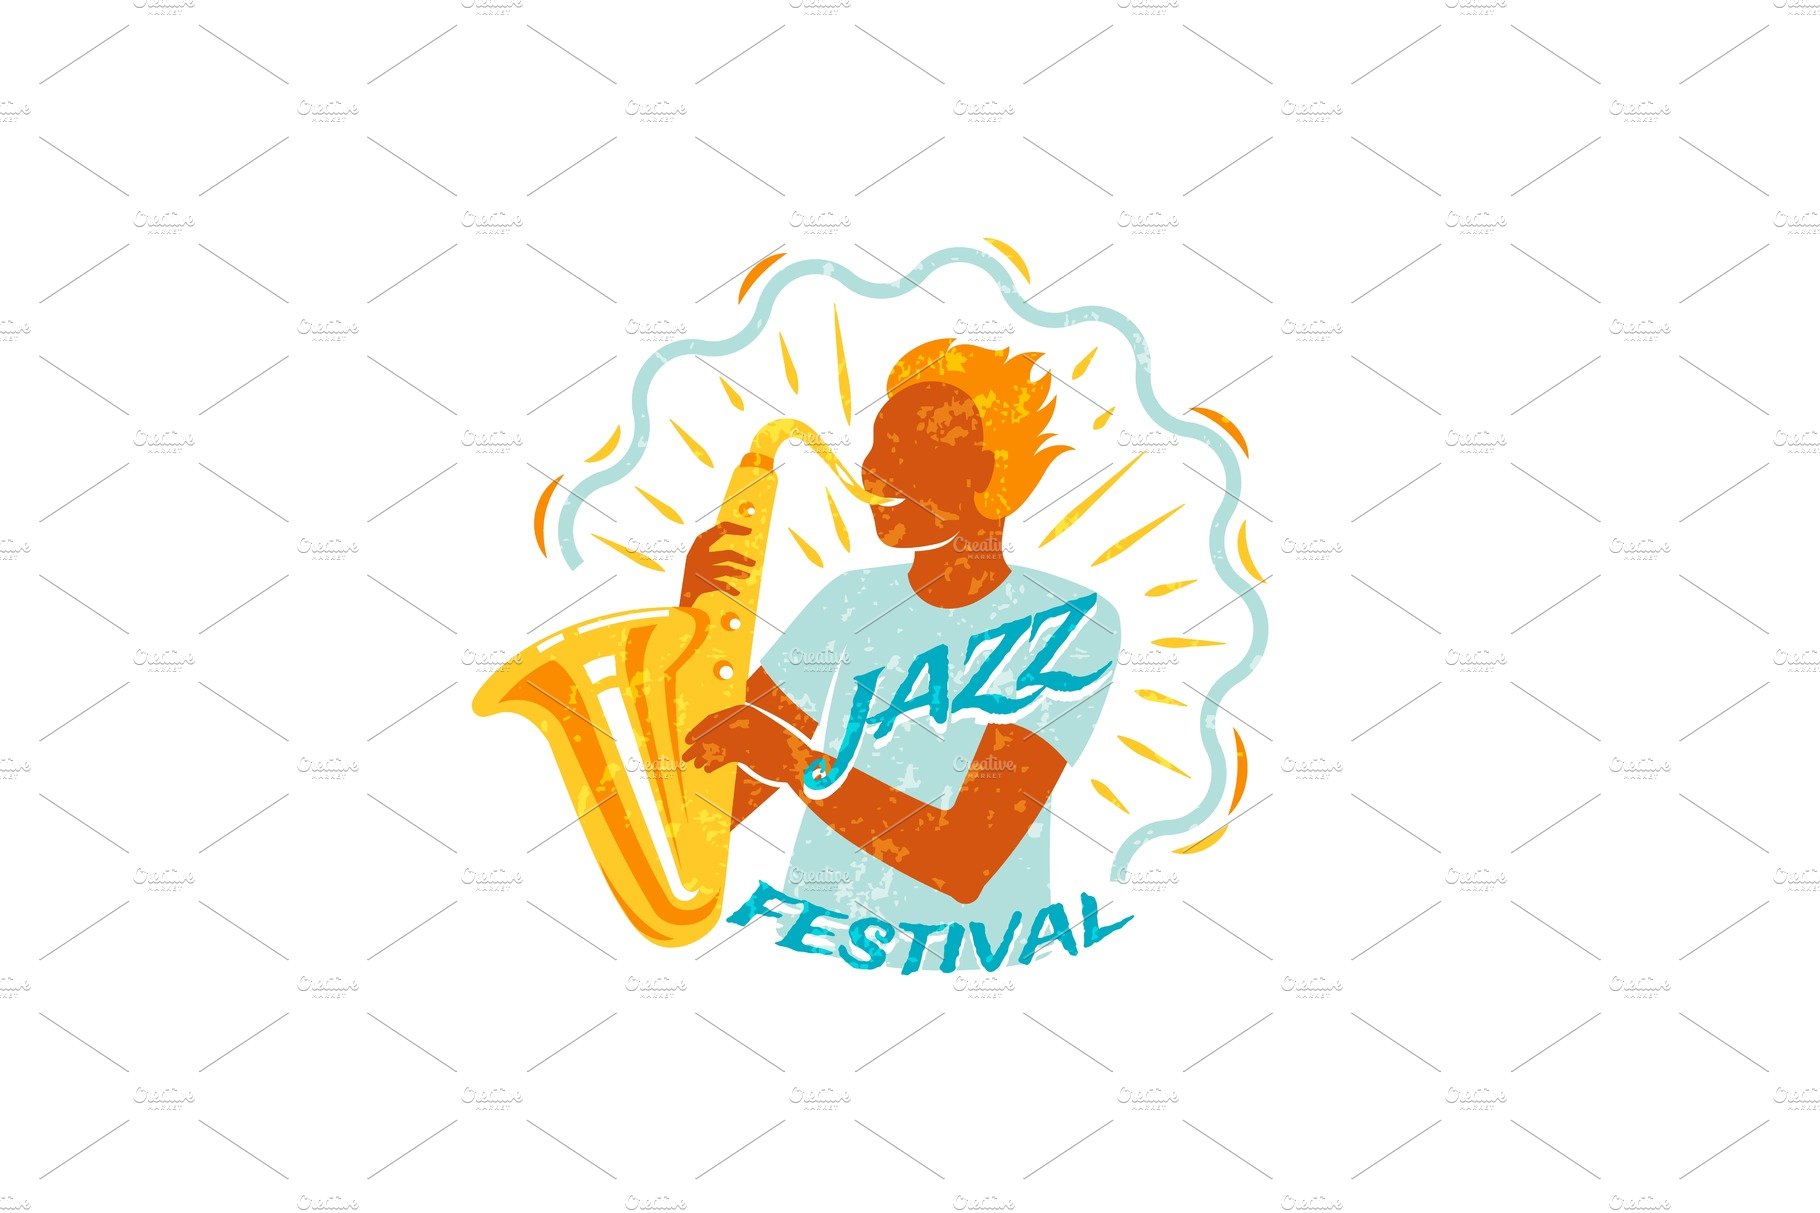 Jazz festival vector music concert cover image.